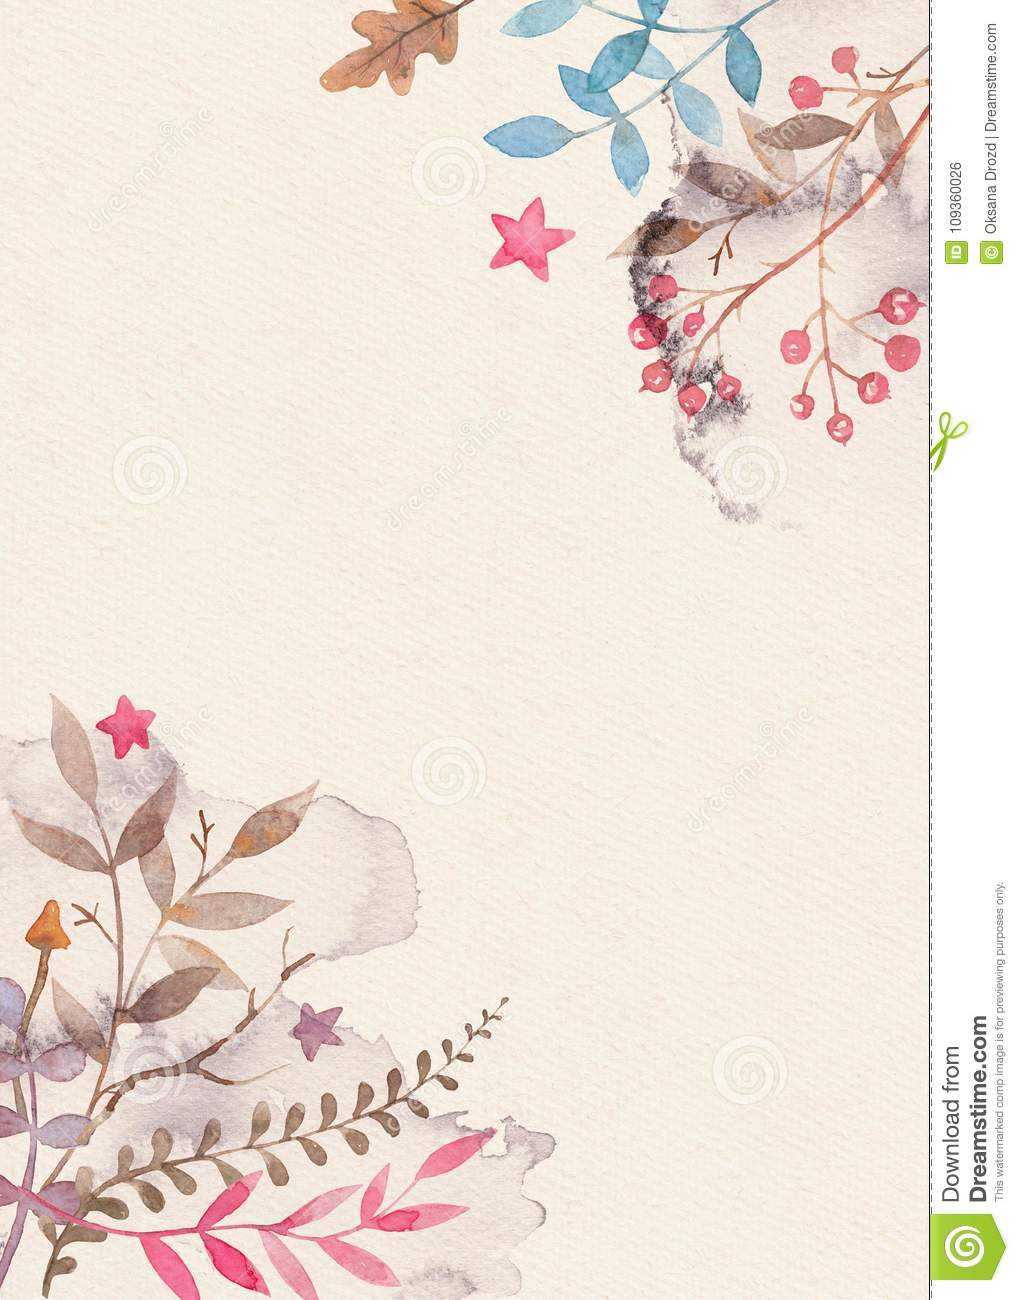 Hand Drawn Watercolor Greeting Card Template With Floral For Greeting Card Layout Templates